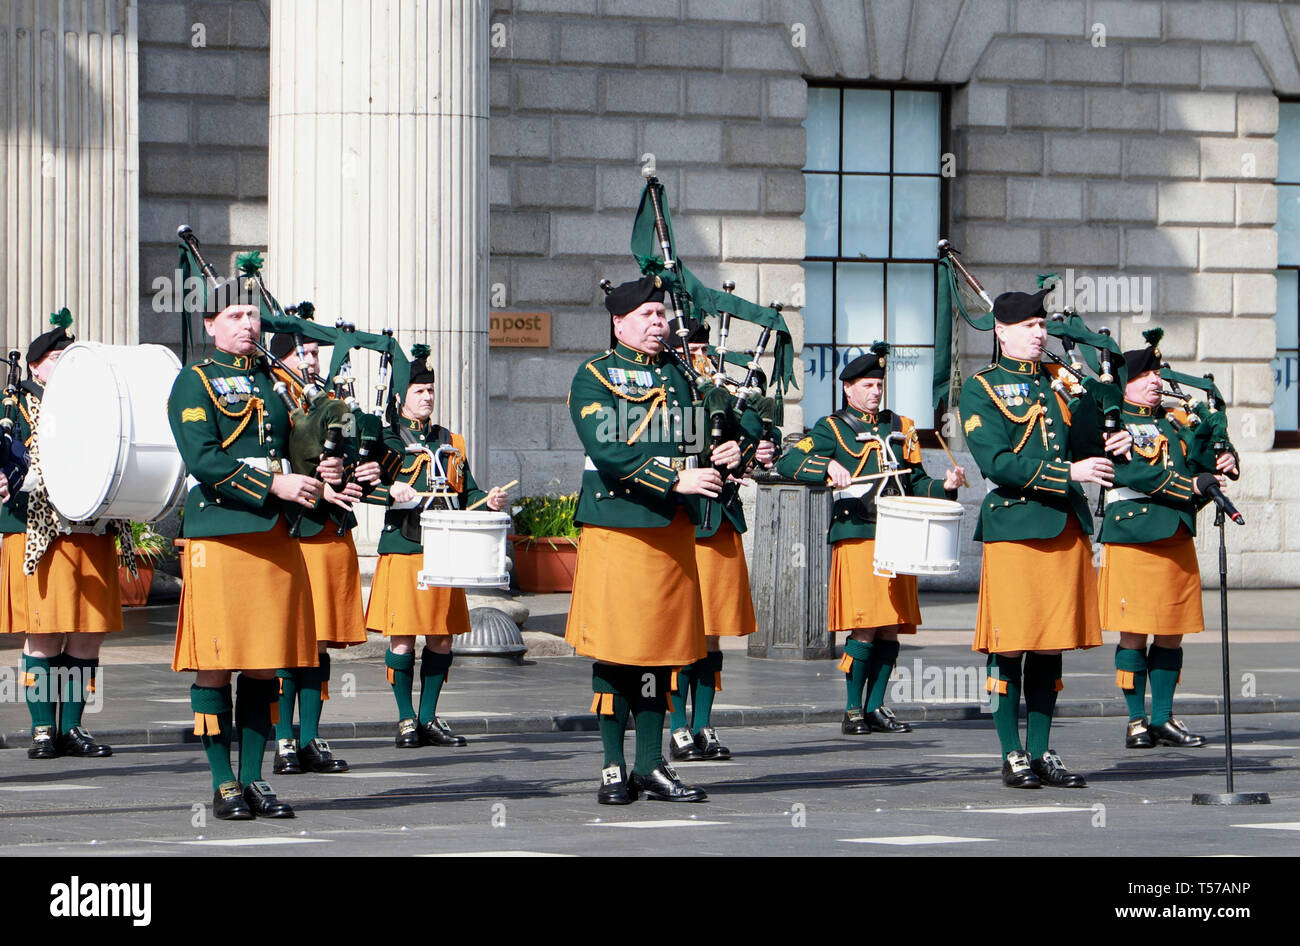 Dublin. 22nd Apr, 2019. A pipe band perform on a ceremony commemorating the 103rd anniversary of Easter Rising in Dublin, Ireland, April 21, 2019. The Easter Rising is an armed insurrection launched by the Irish republicans to end the British rule in Ireland. It began on Easter Monday, April 24, 1916, and last for six days. Credit: Xinhua/Alamy Live News Stock Photo